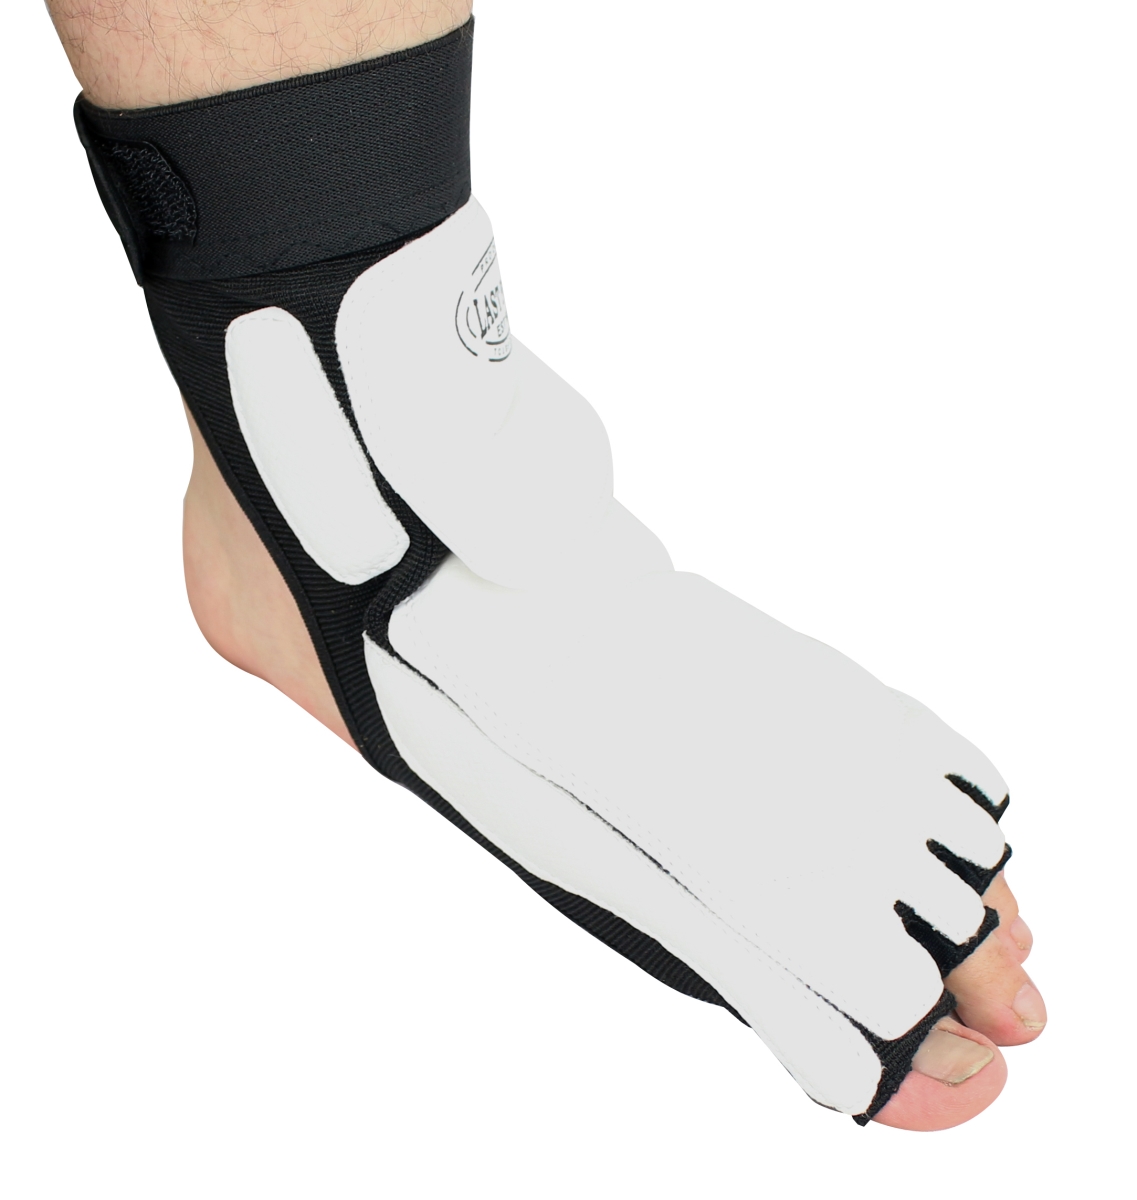 High Quality Taekwondo Foot Ankle Support Protector Kick Boxing Footwear - Large